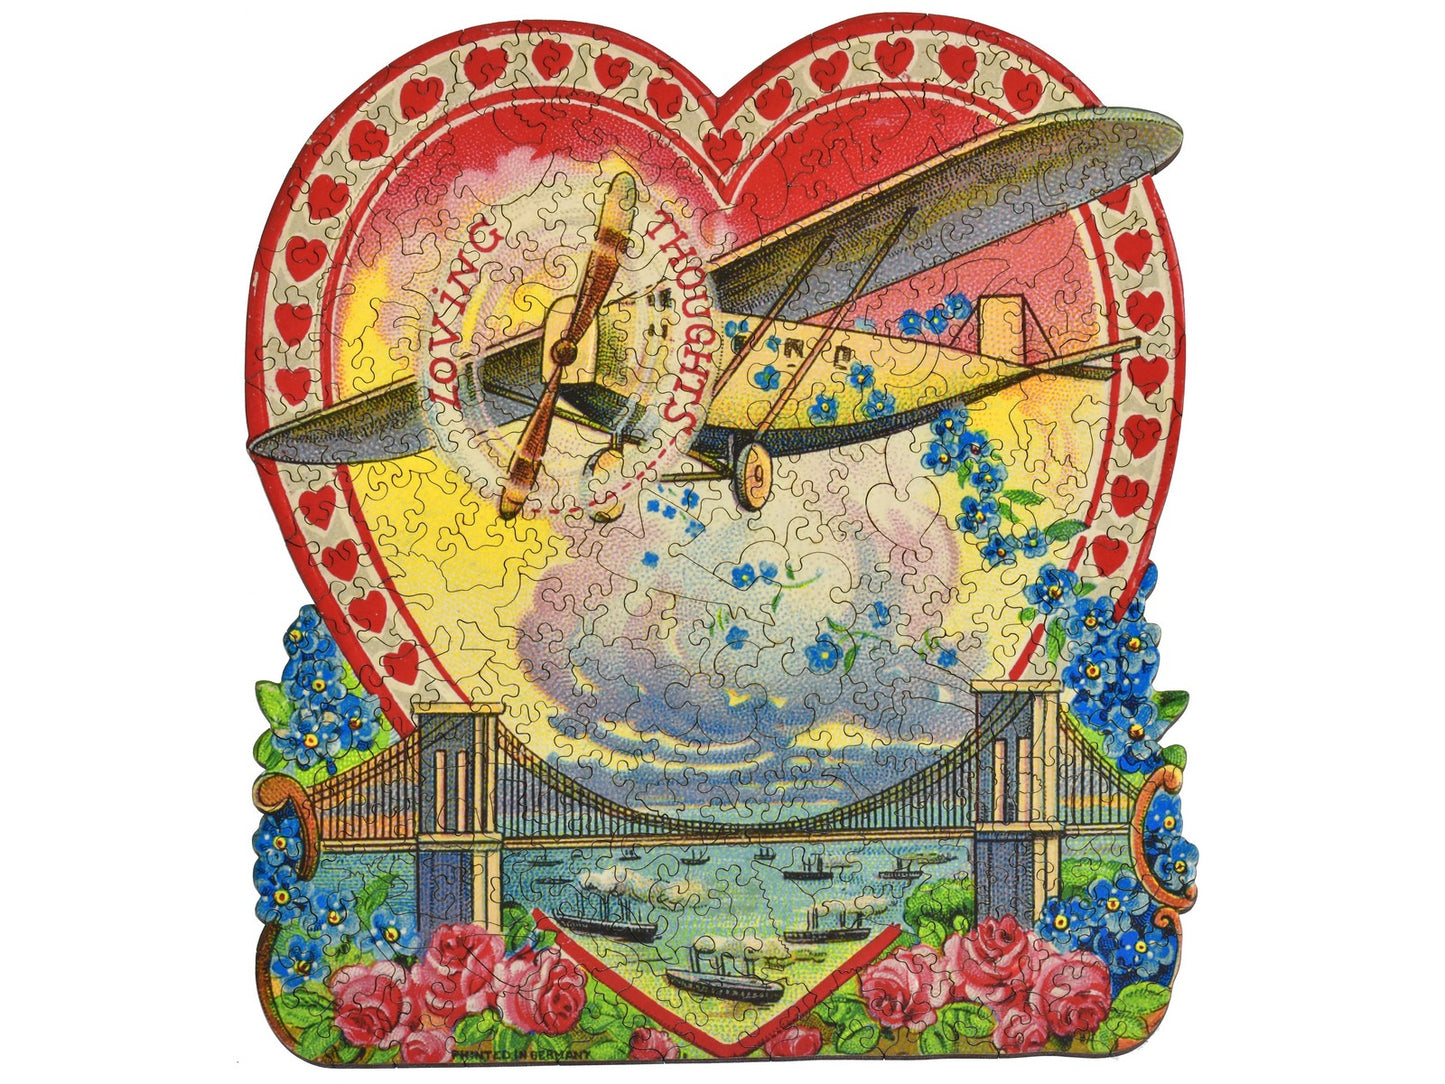 The front of the puzzle, Loving Thoughts, which shows an airplane flying over a bridge, and the words, "loving thoughts".